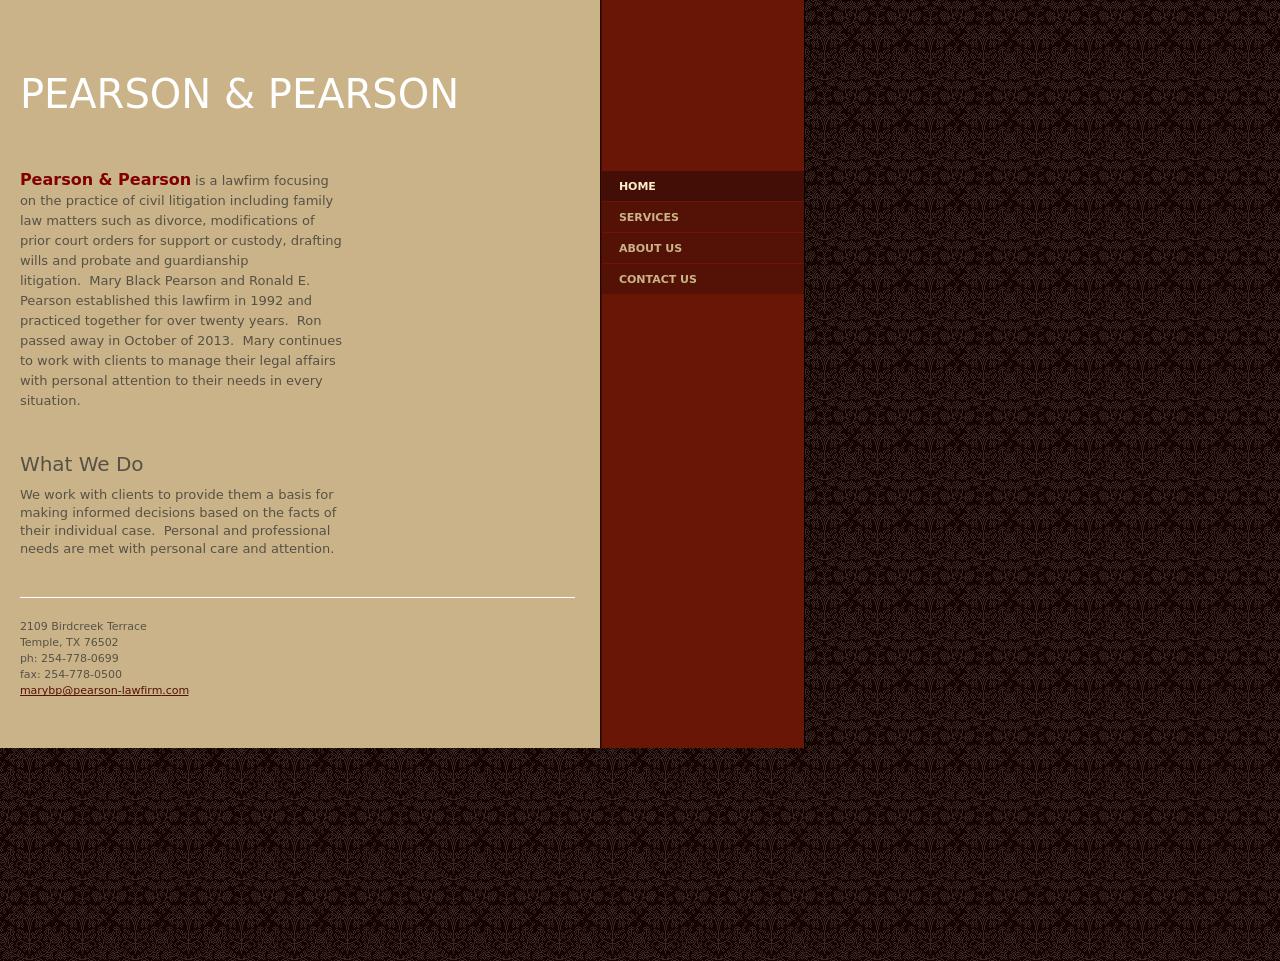 Pearson & Pearson - Temple TX Lawyers